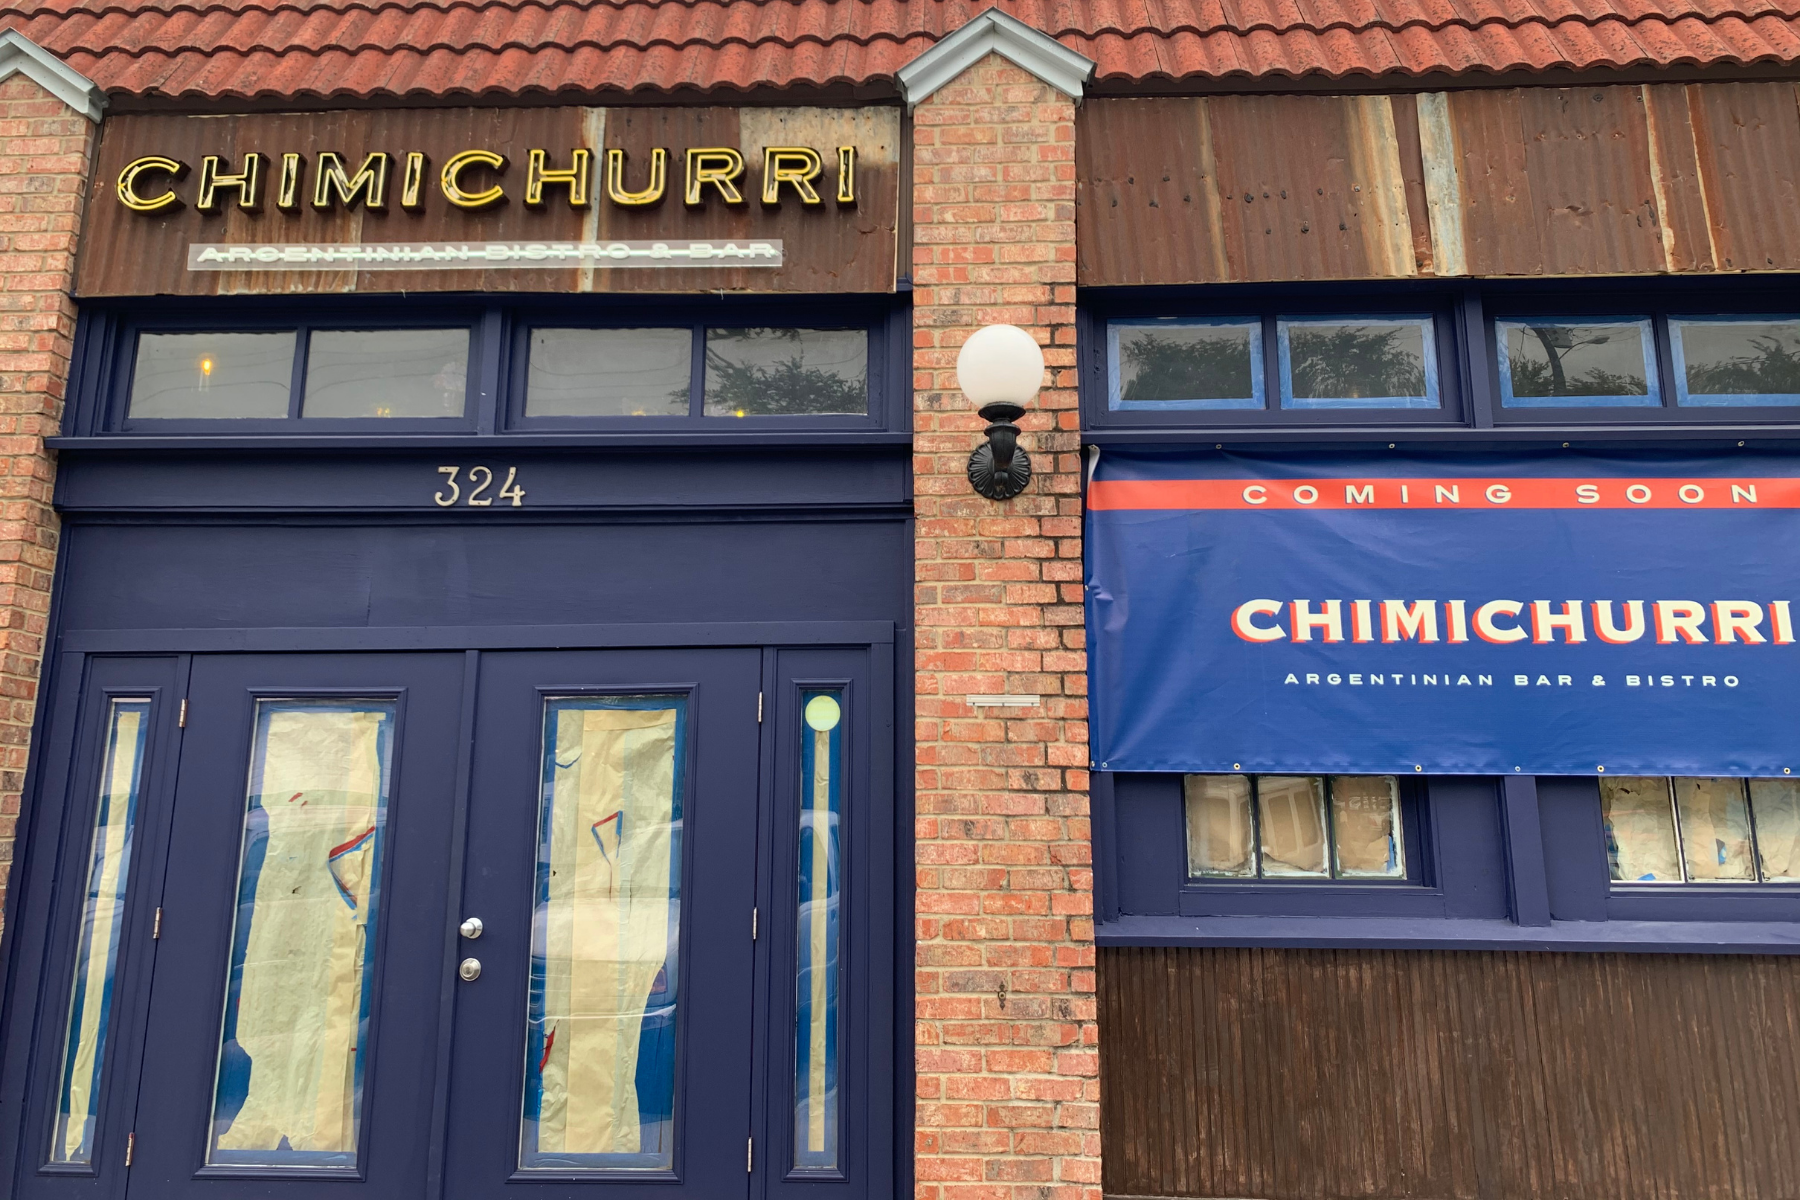 The exterior of Chimichurri restaurant in the Bishop Arts District